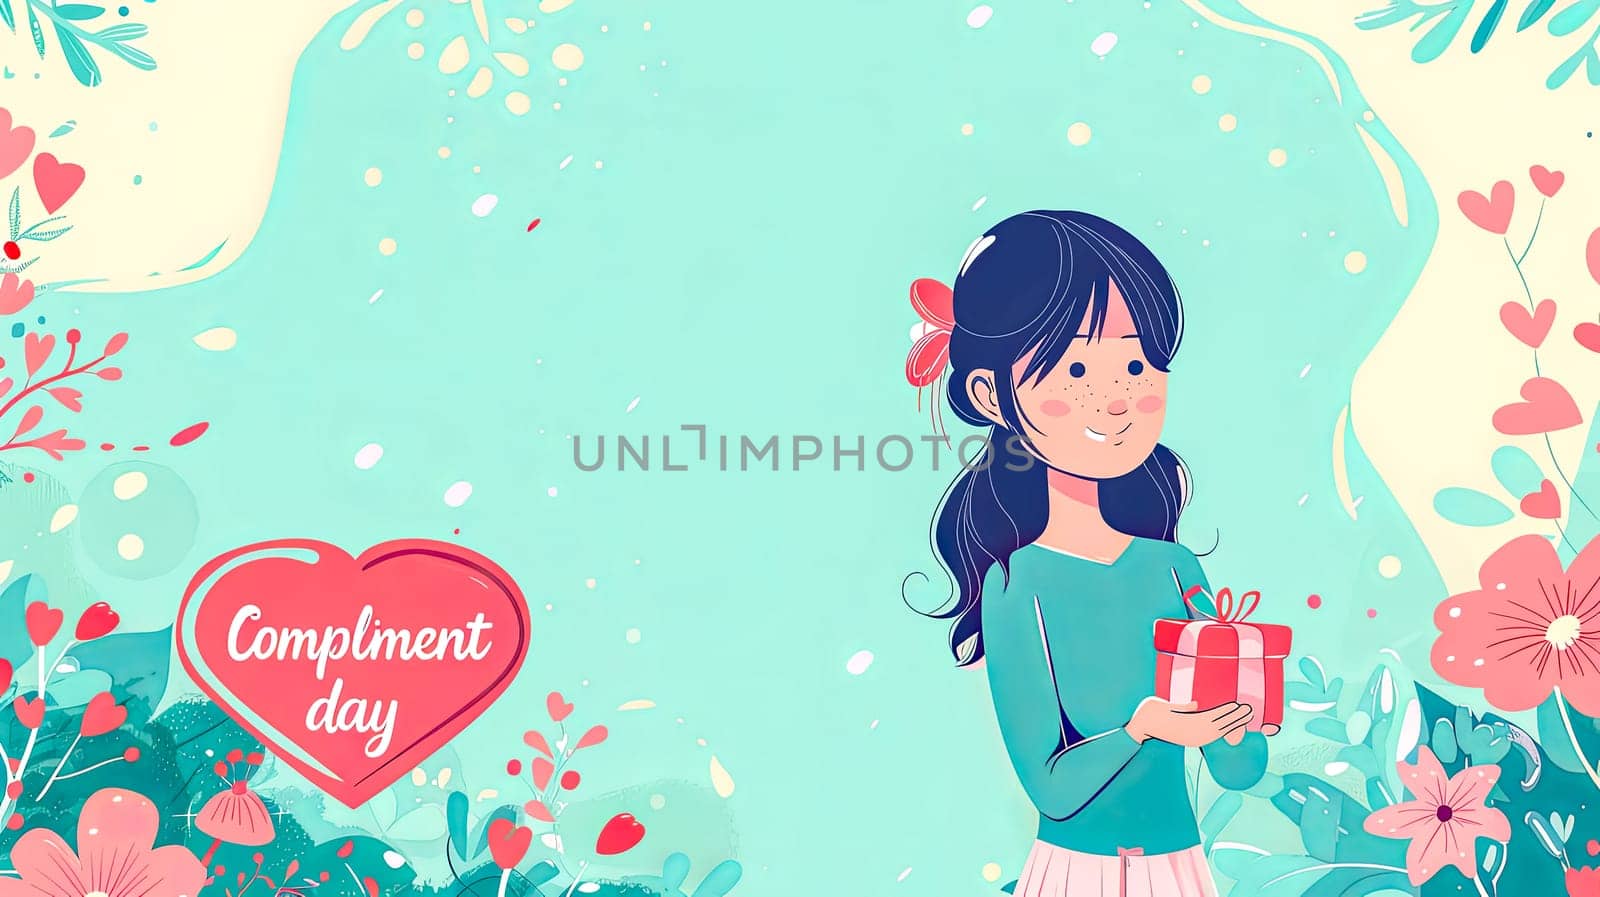 Illustration of a delighted girl holding a red gift, celebrating compliment day amid a floral backdrop